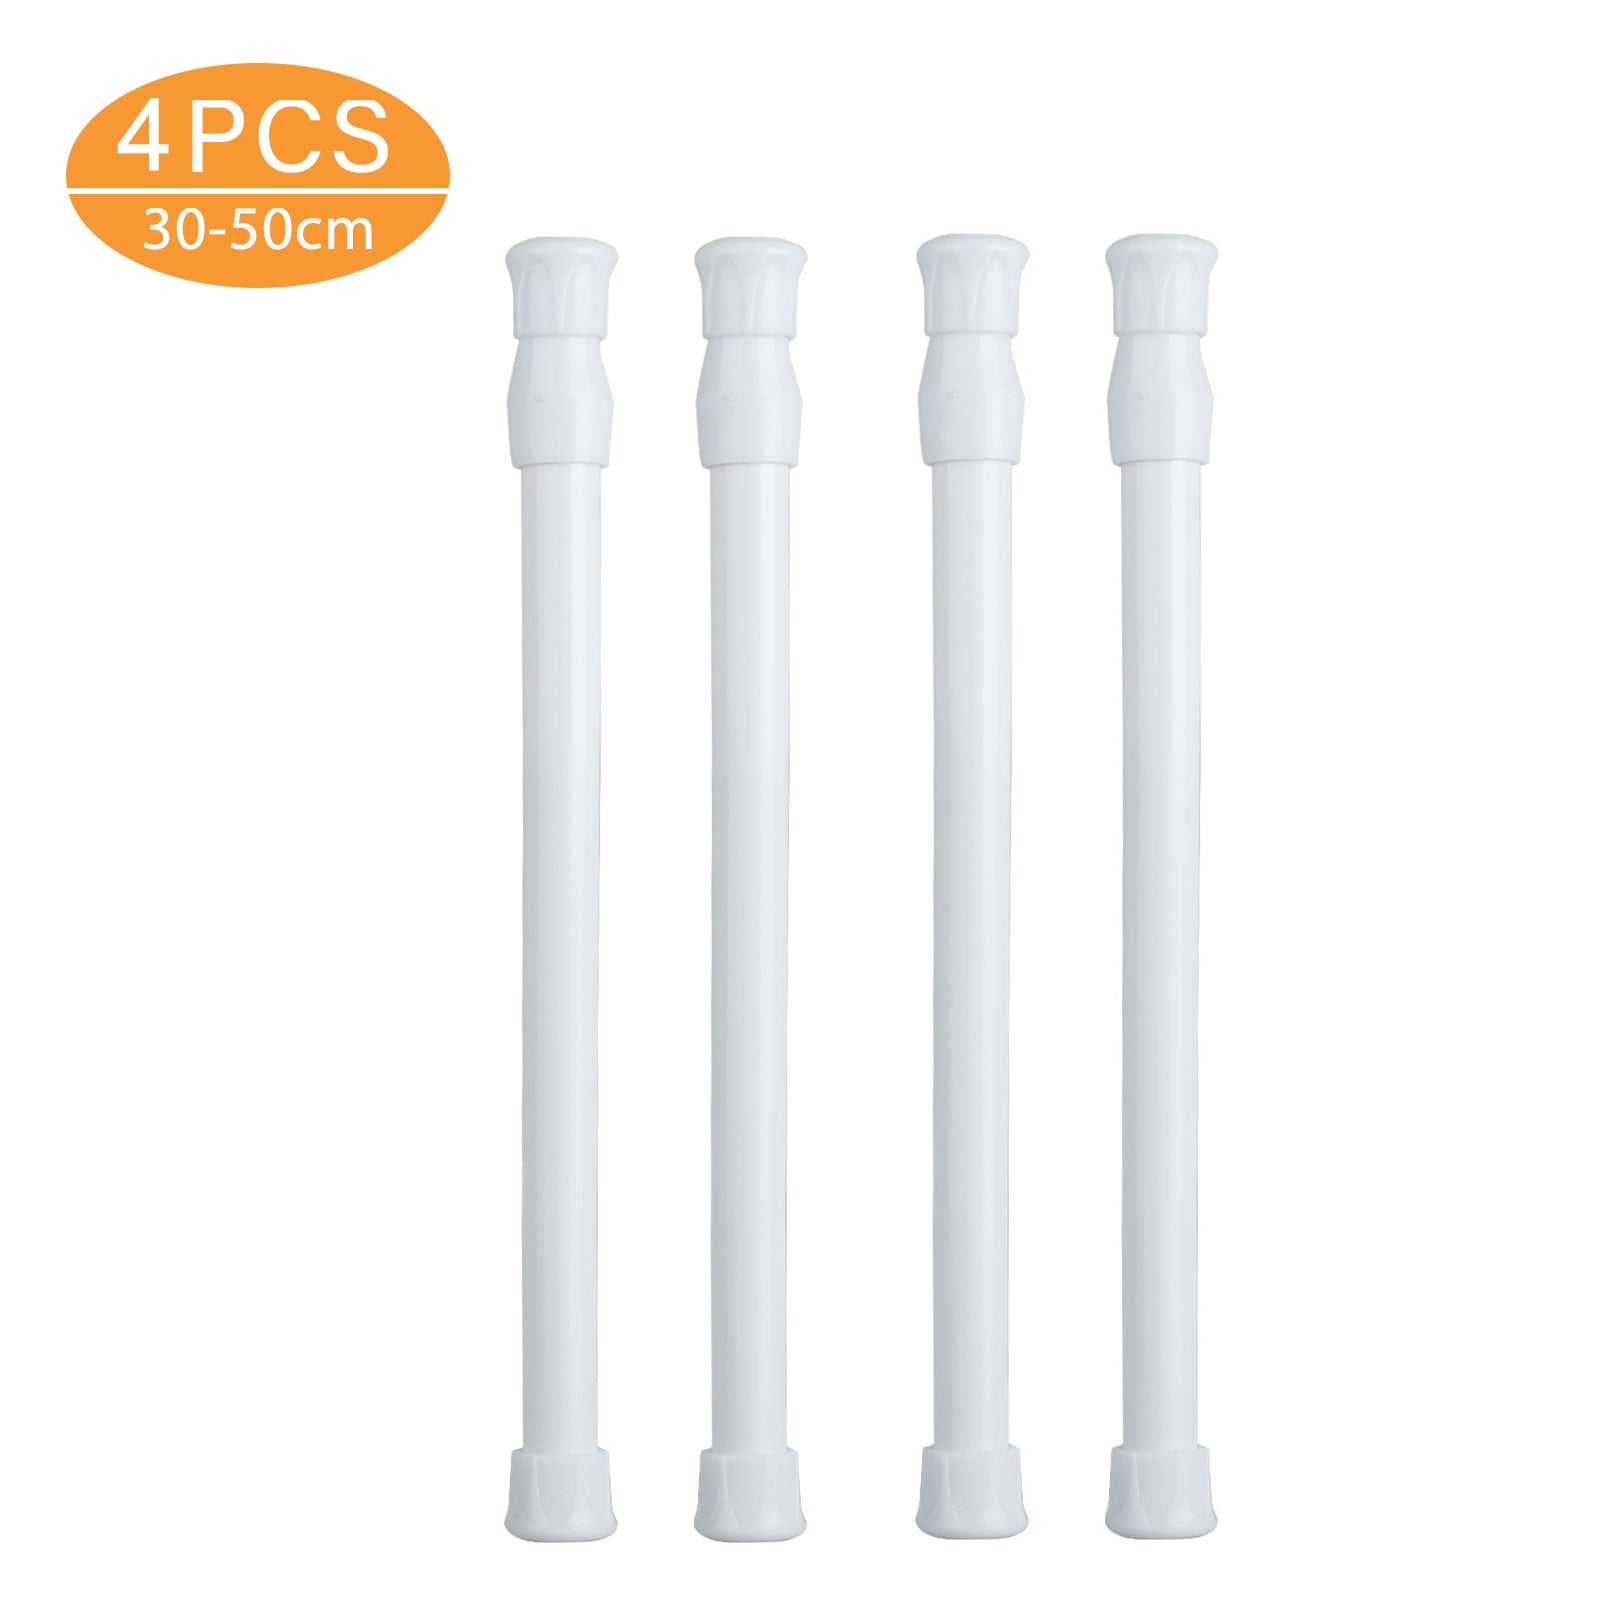 Tension Rods 11.8 to 27.6 Inch,  Spring Tension Curtain Rod, Adjustable Spring Cupboard Bars Tension Curtain Rod Shower Rod for DIY Projects Cupboard Wardrobe Window, White